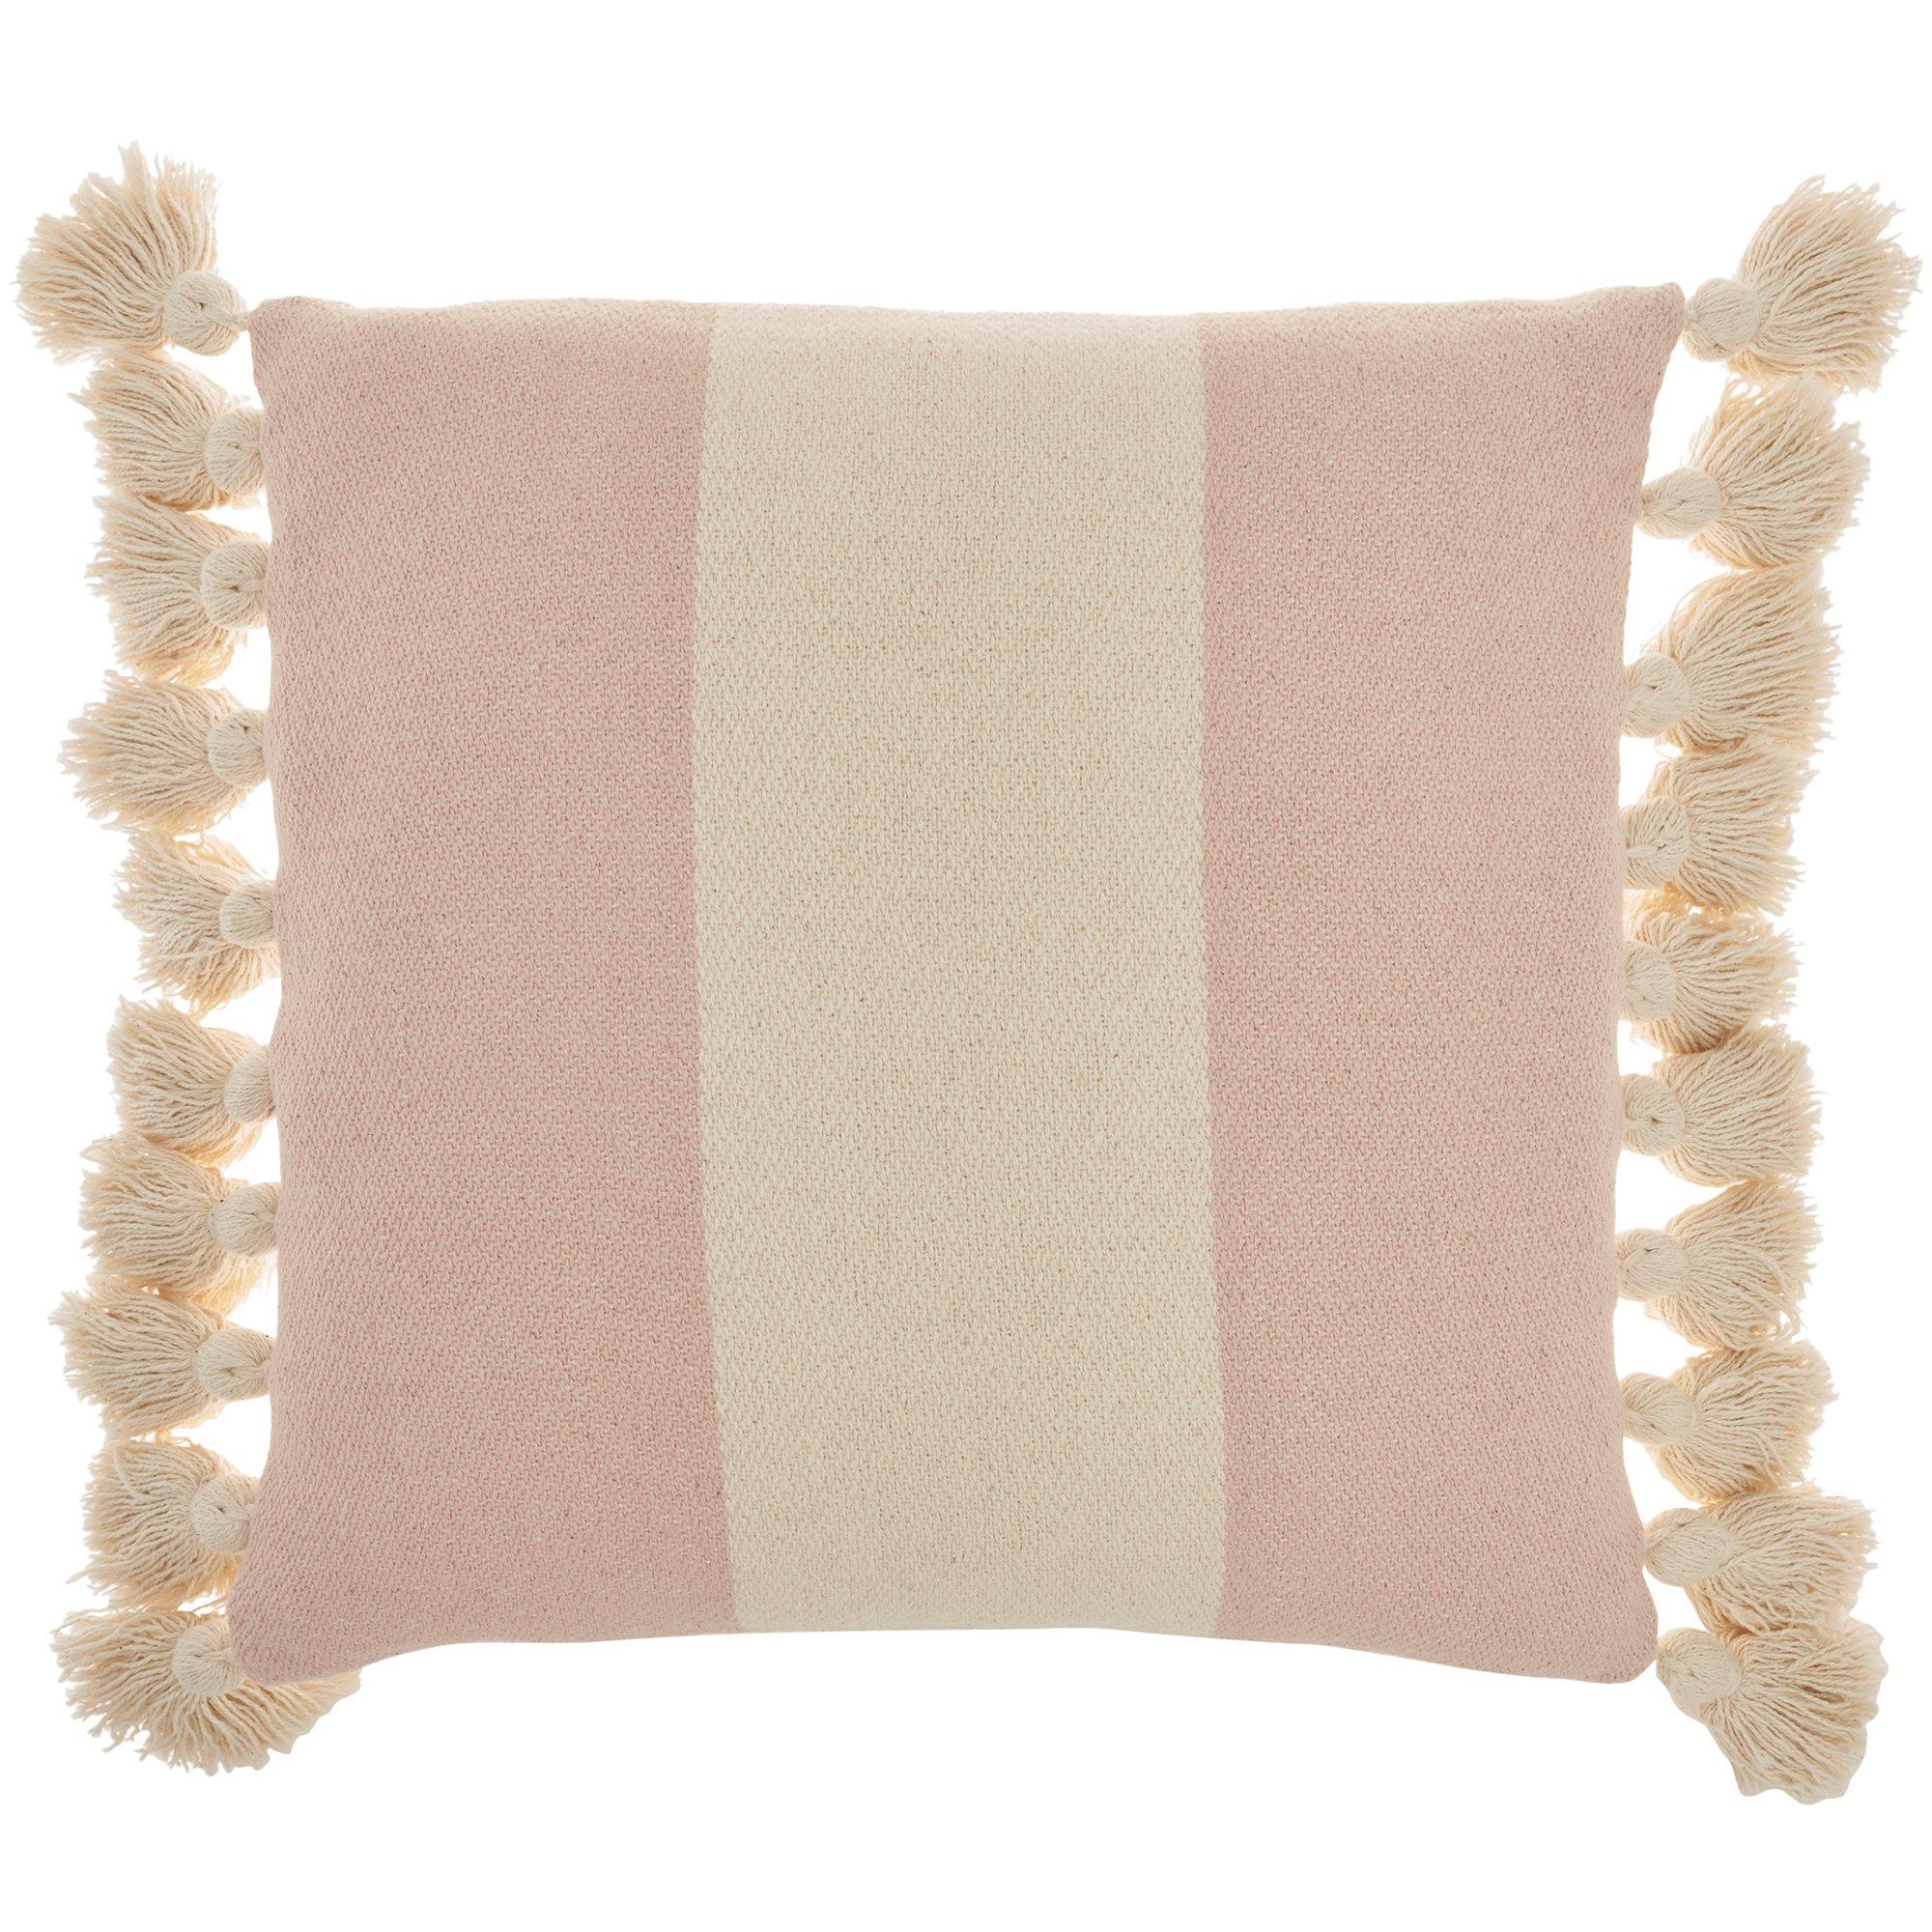 18x18 Knotted Tassel Striped Outdoor Pillow